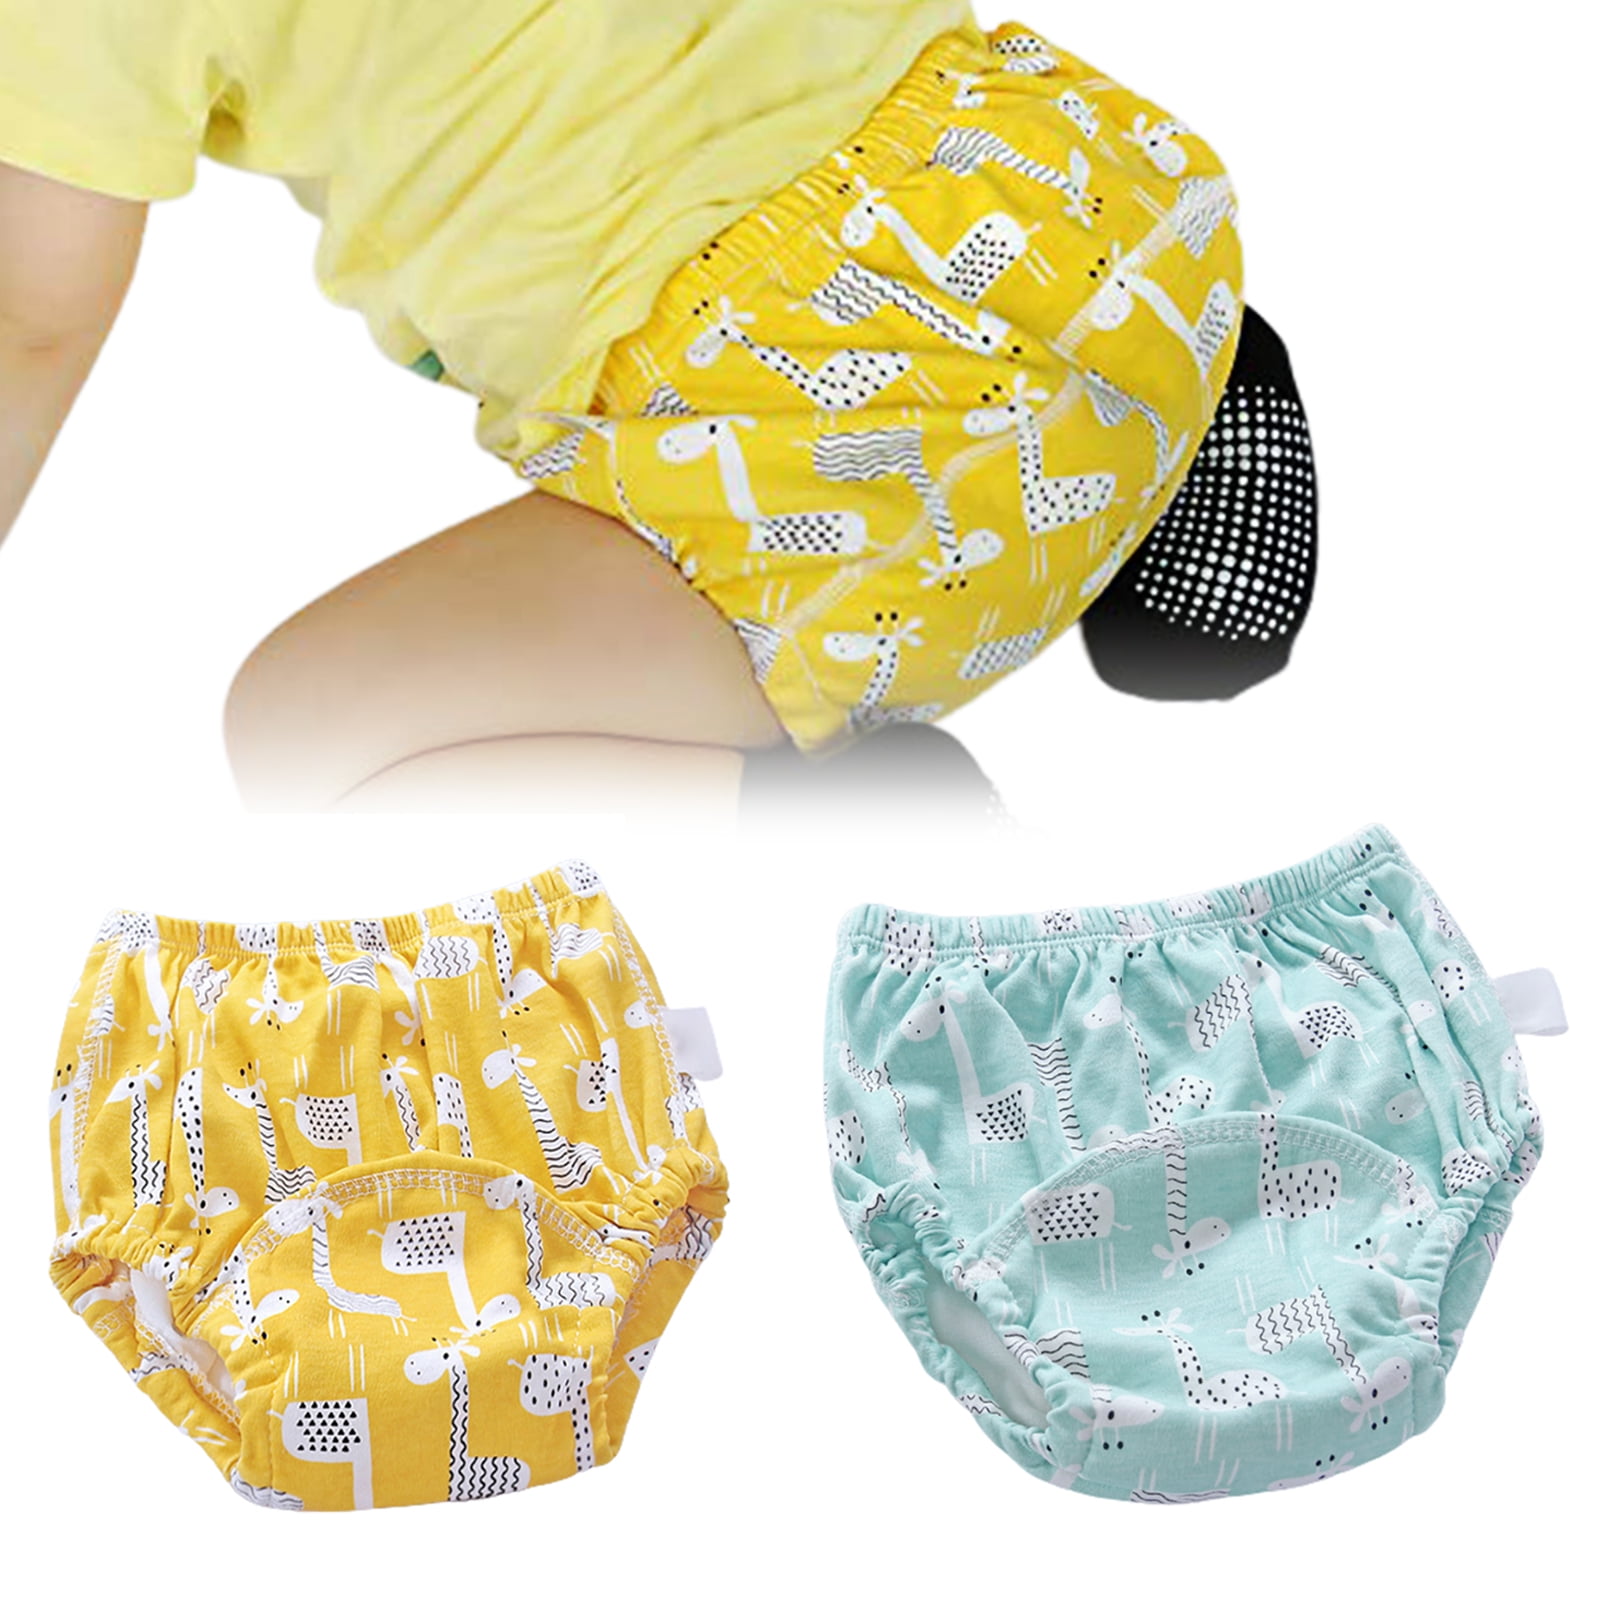 2021 New Anti Leakage Training Pants for Babies Toddler 4 Layers Potty Training Pants 6 Pack 